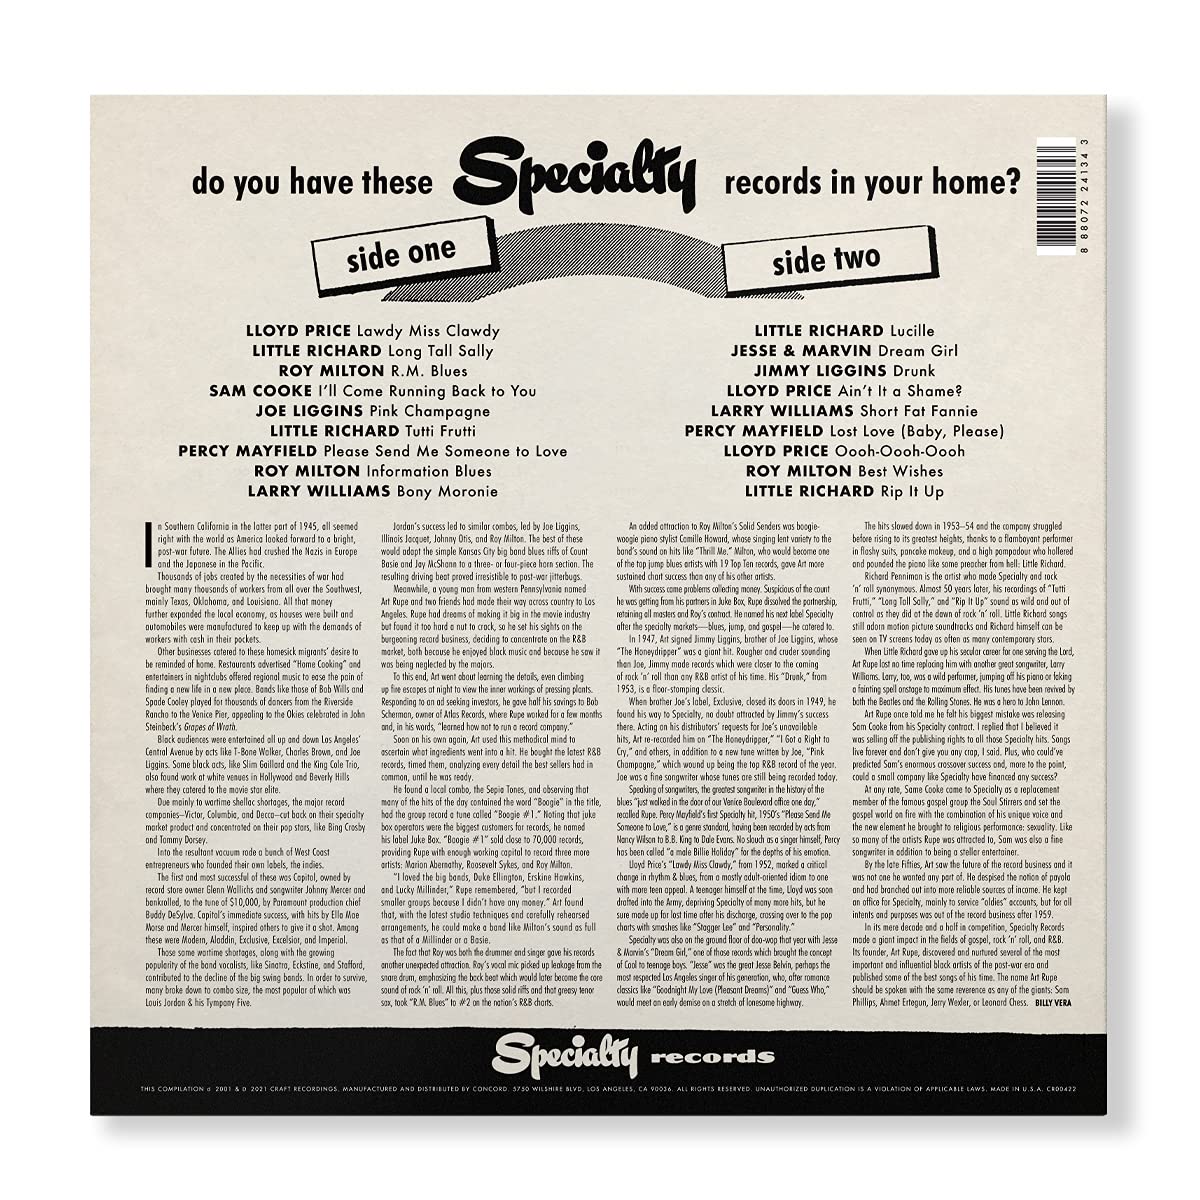 Specialty Records 레이블 컴필레이션 (Rip It Up: The Best Of Specialty Records) [LP]